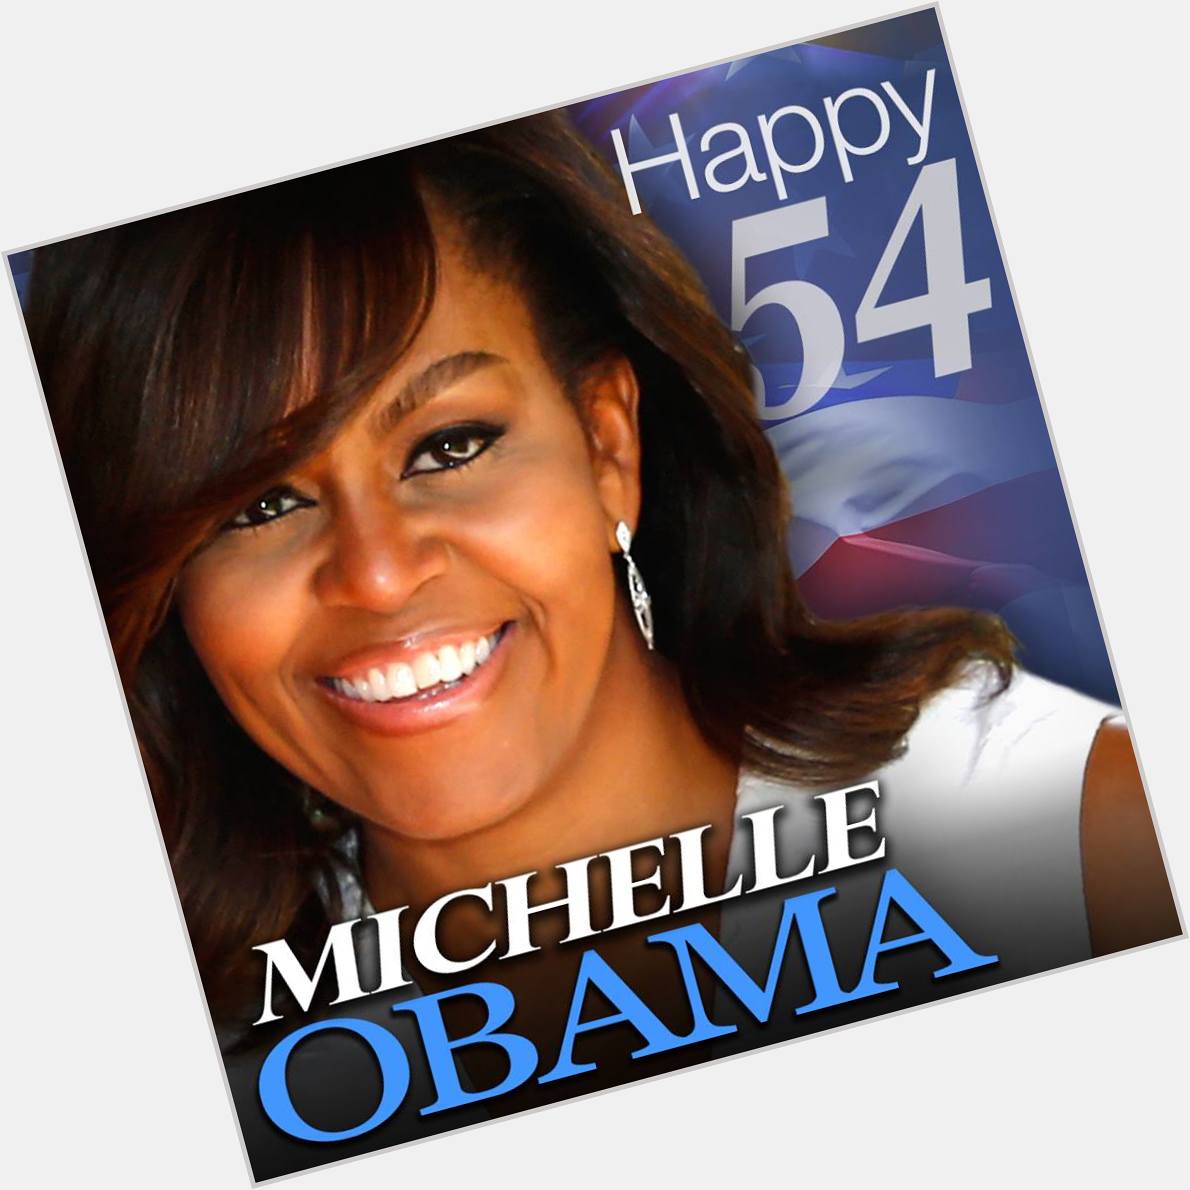 Happy 54th birthday to the former first lady, Michelle Obama!  